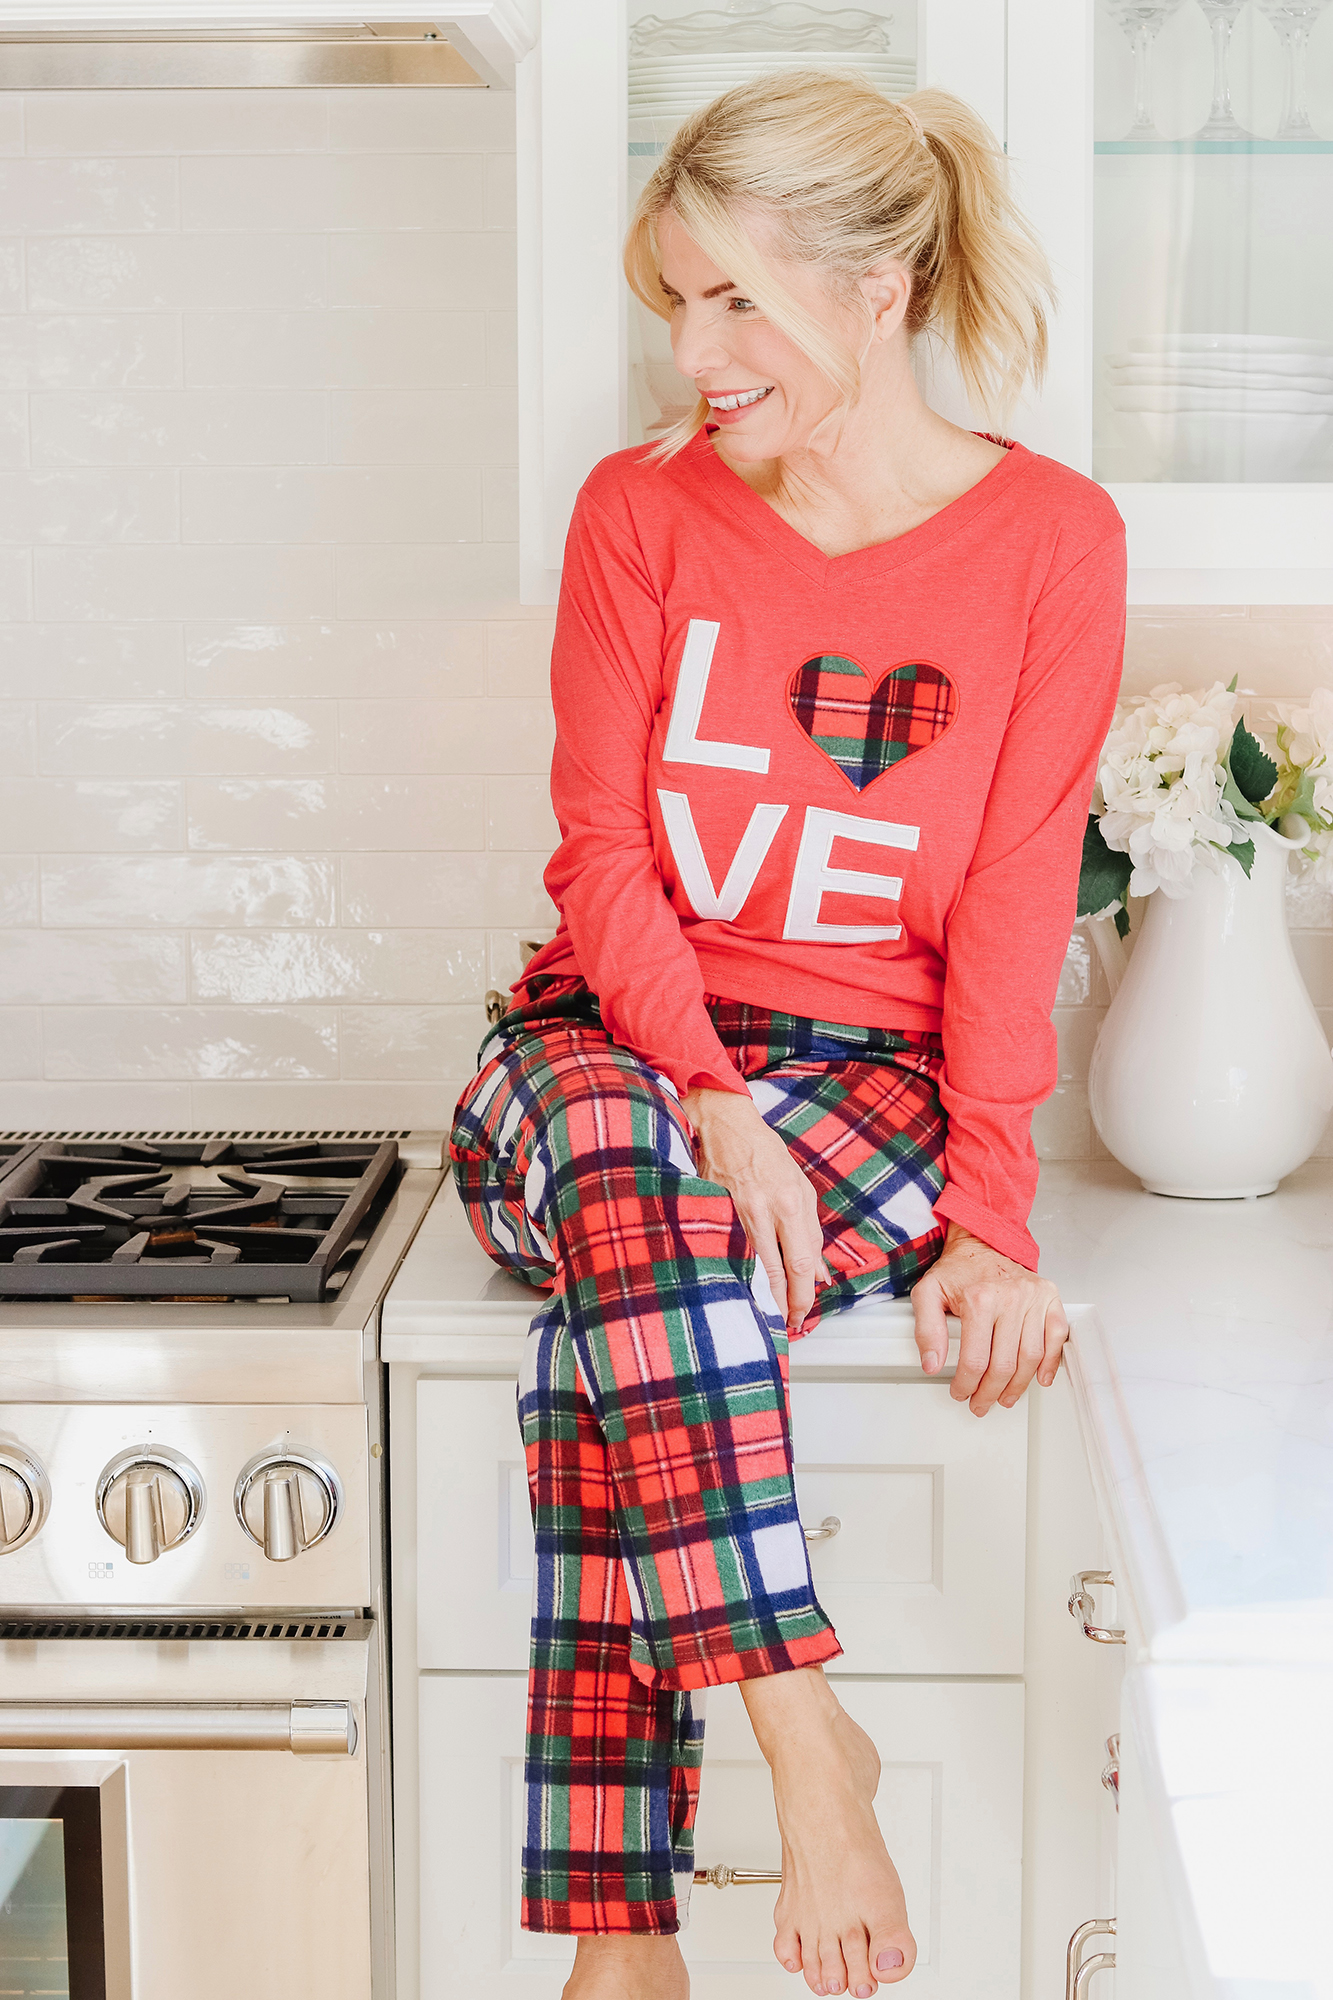 Surgery Update & Cozy Holiday PJs with Jeff - All about my explant surgery & why I'm doing it. Coziest matching pjs under $20 are linked here too! 